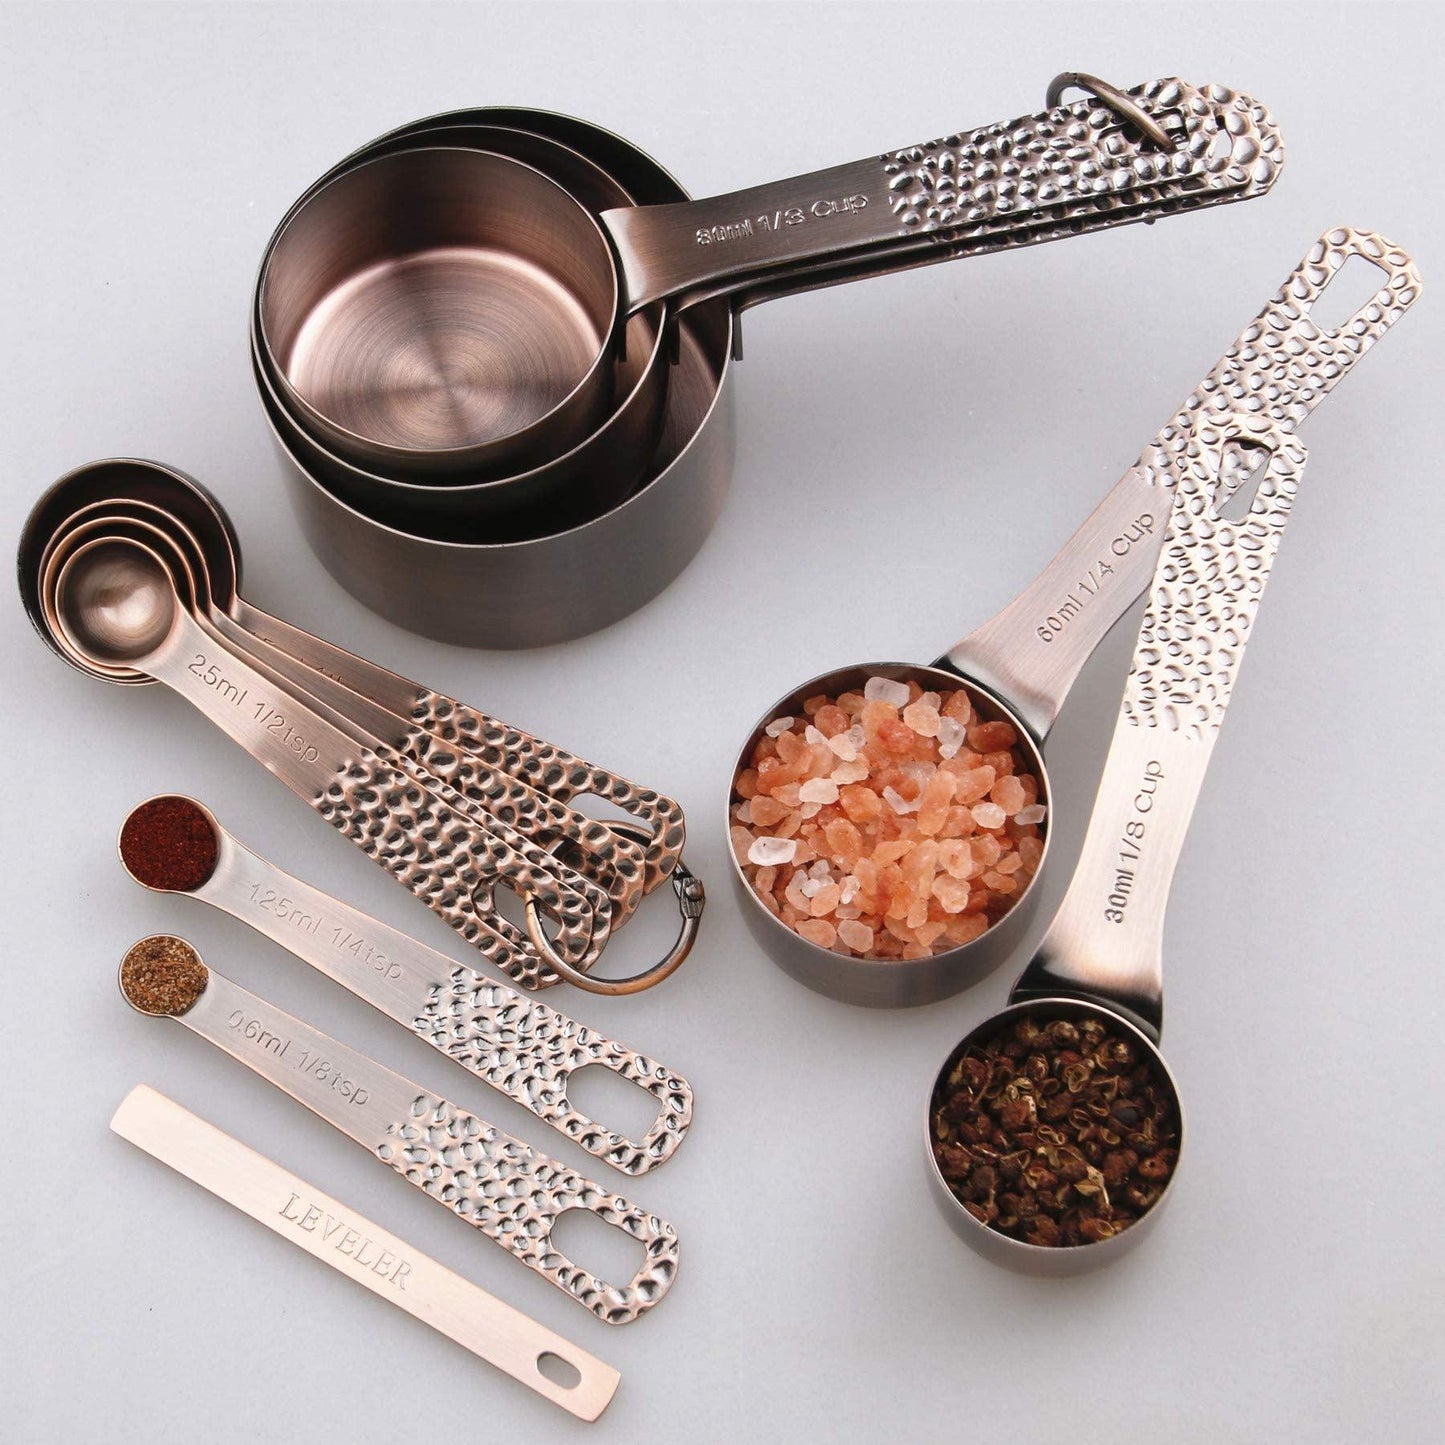 Measuring Cups and Spoons, Copper Measuring Cups and Spoons set, Stainless Steel Copper Plated 14 Piece Set of 5 Copper Measuring Cups and 6 Copper Measuring Spoons,1Leveler and 2Rings, Kitchen Tool - CookCave